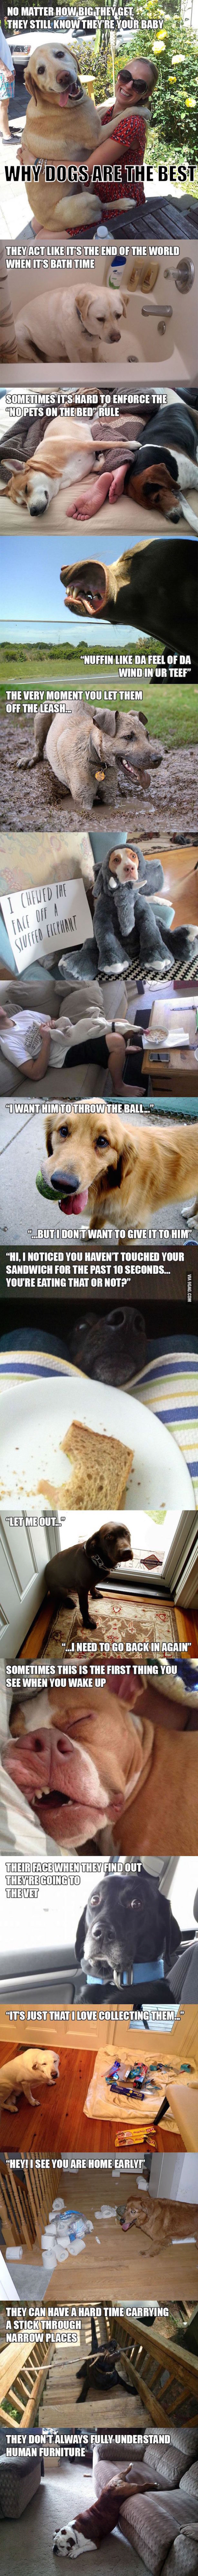 funny pictures of why dogs are the best